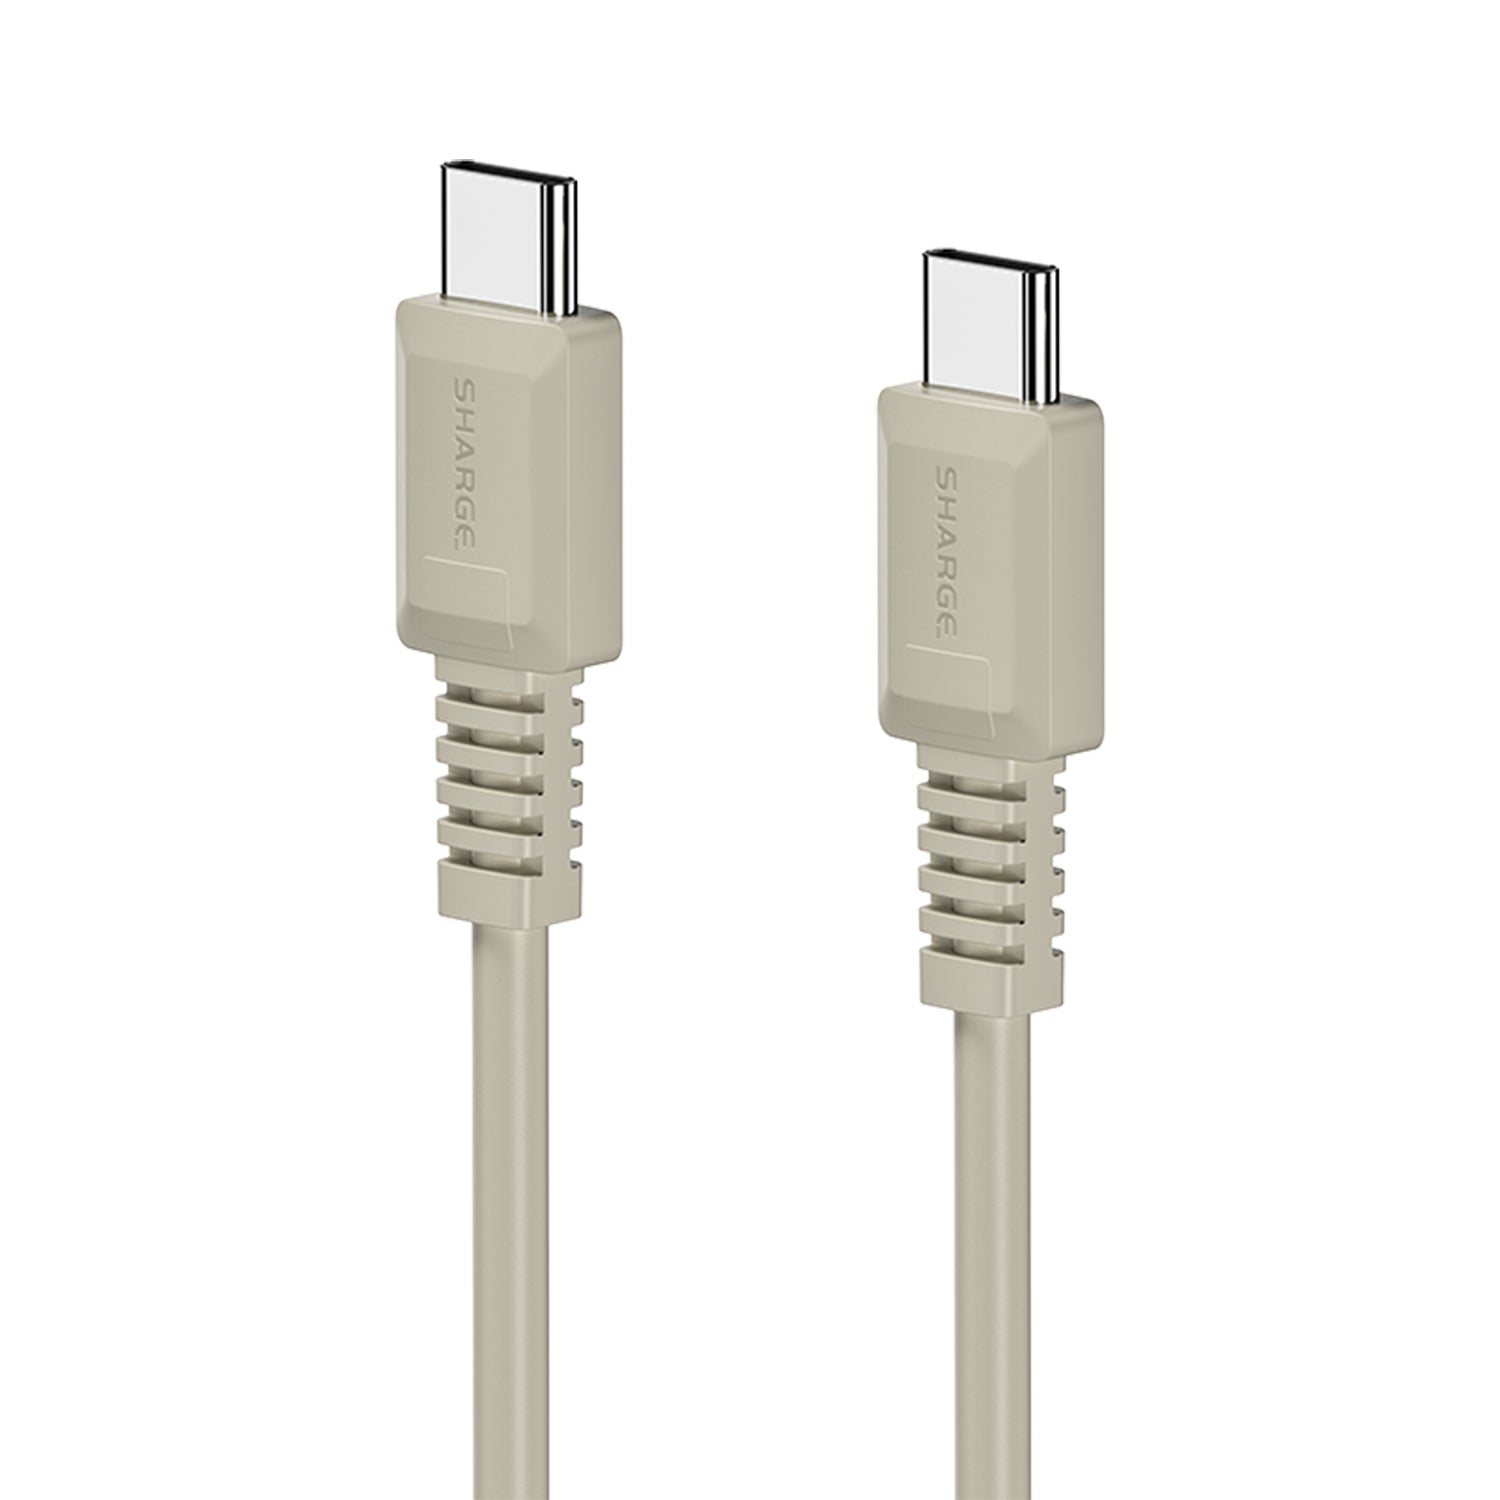 Shargeek SL108 Retro 100W PD Fast Charging USB-C to USB-C Cable 1.2m PD E-marker, Retro White